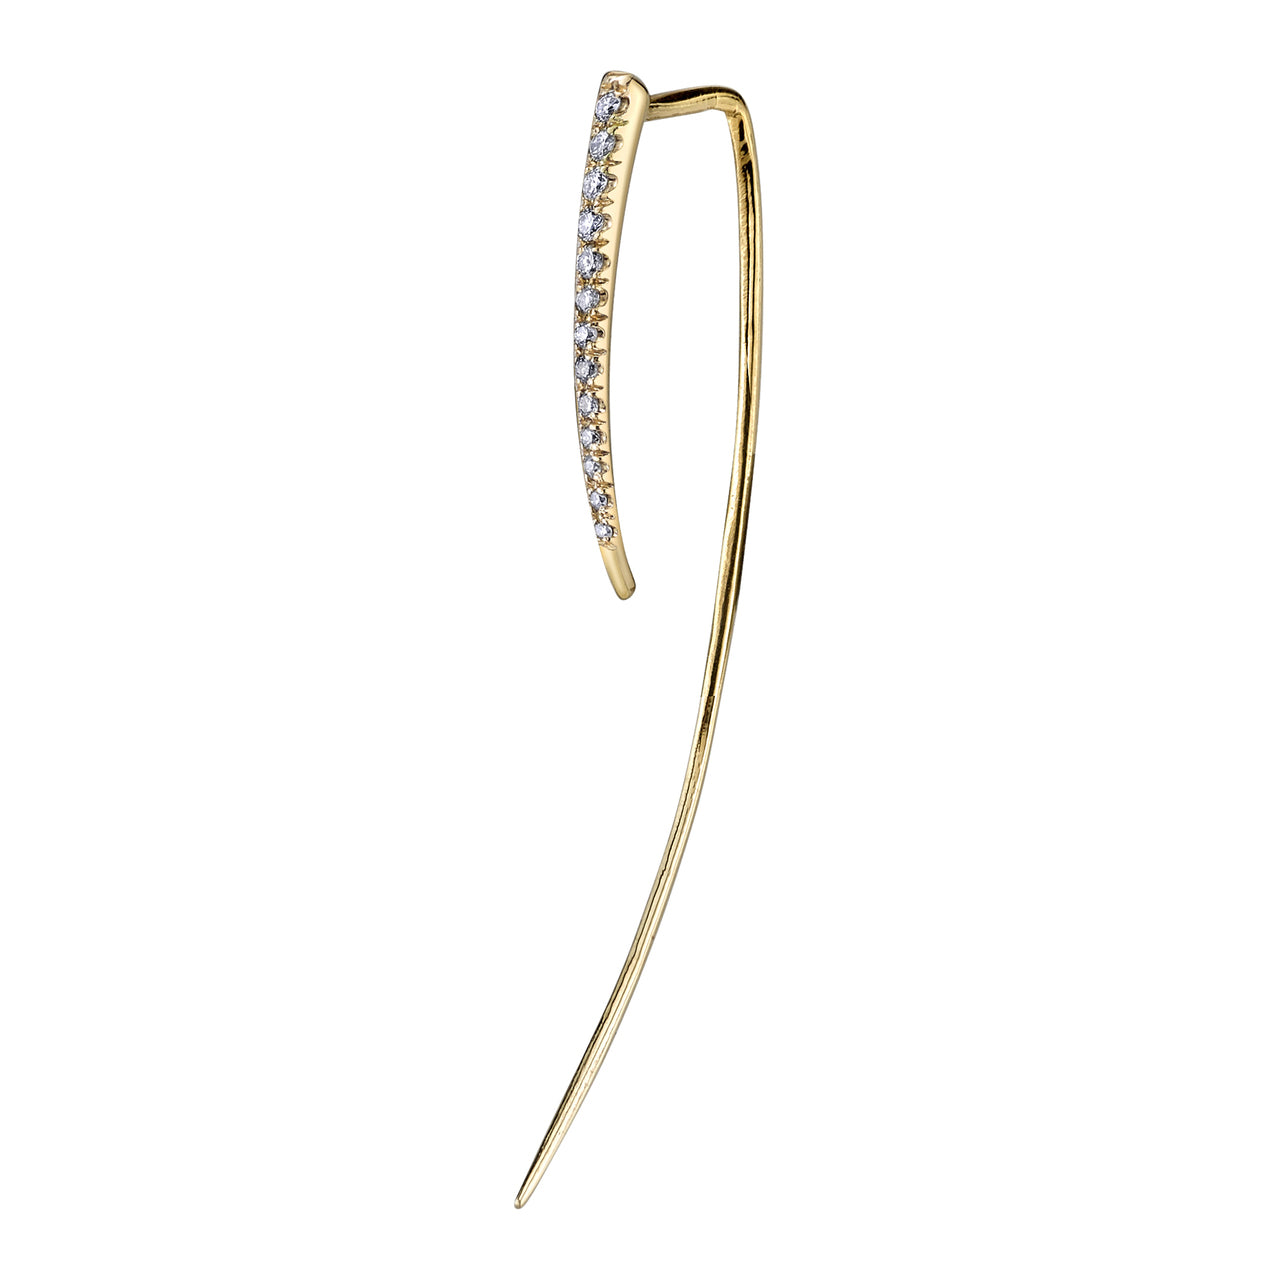 XL Classic Infinite Tusk Earring with White Pave Diamonds